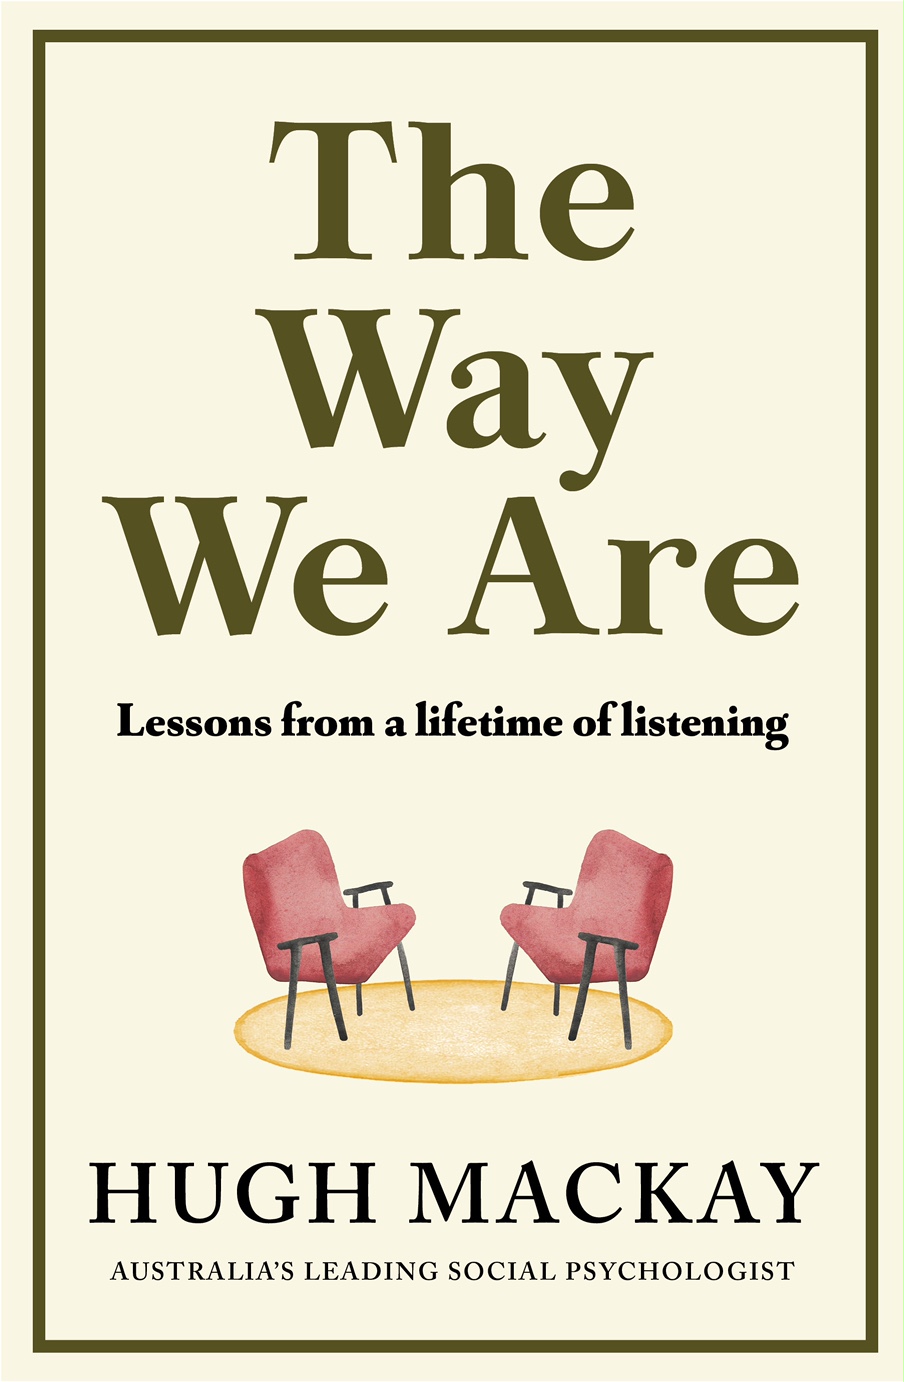 Book cover for The Way We Are by Hugh Mackay, depicting two sofa chairs facing each other.